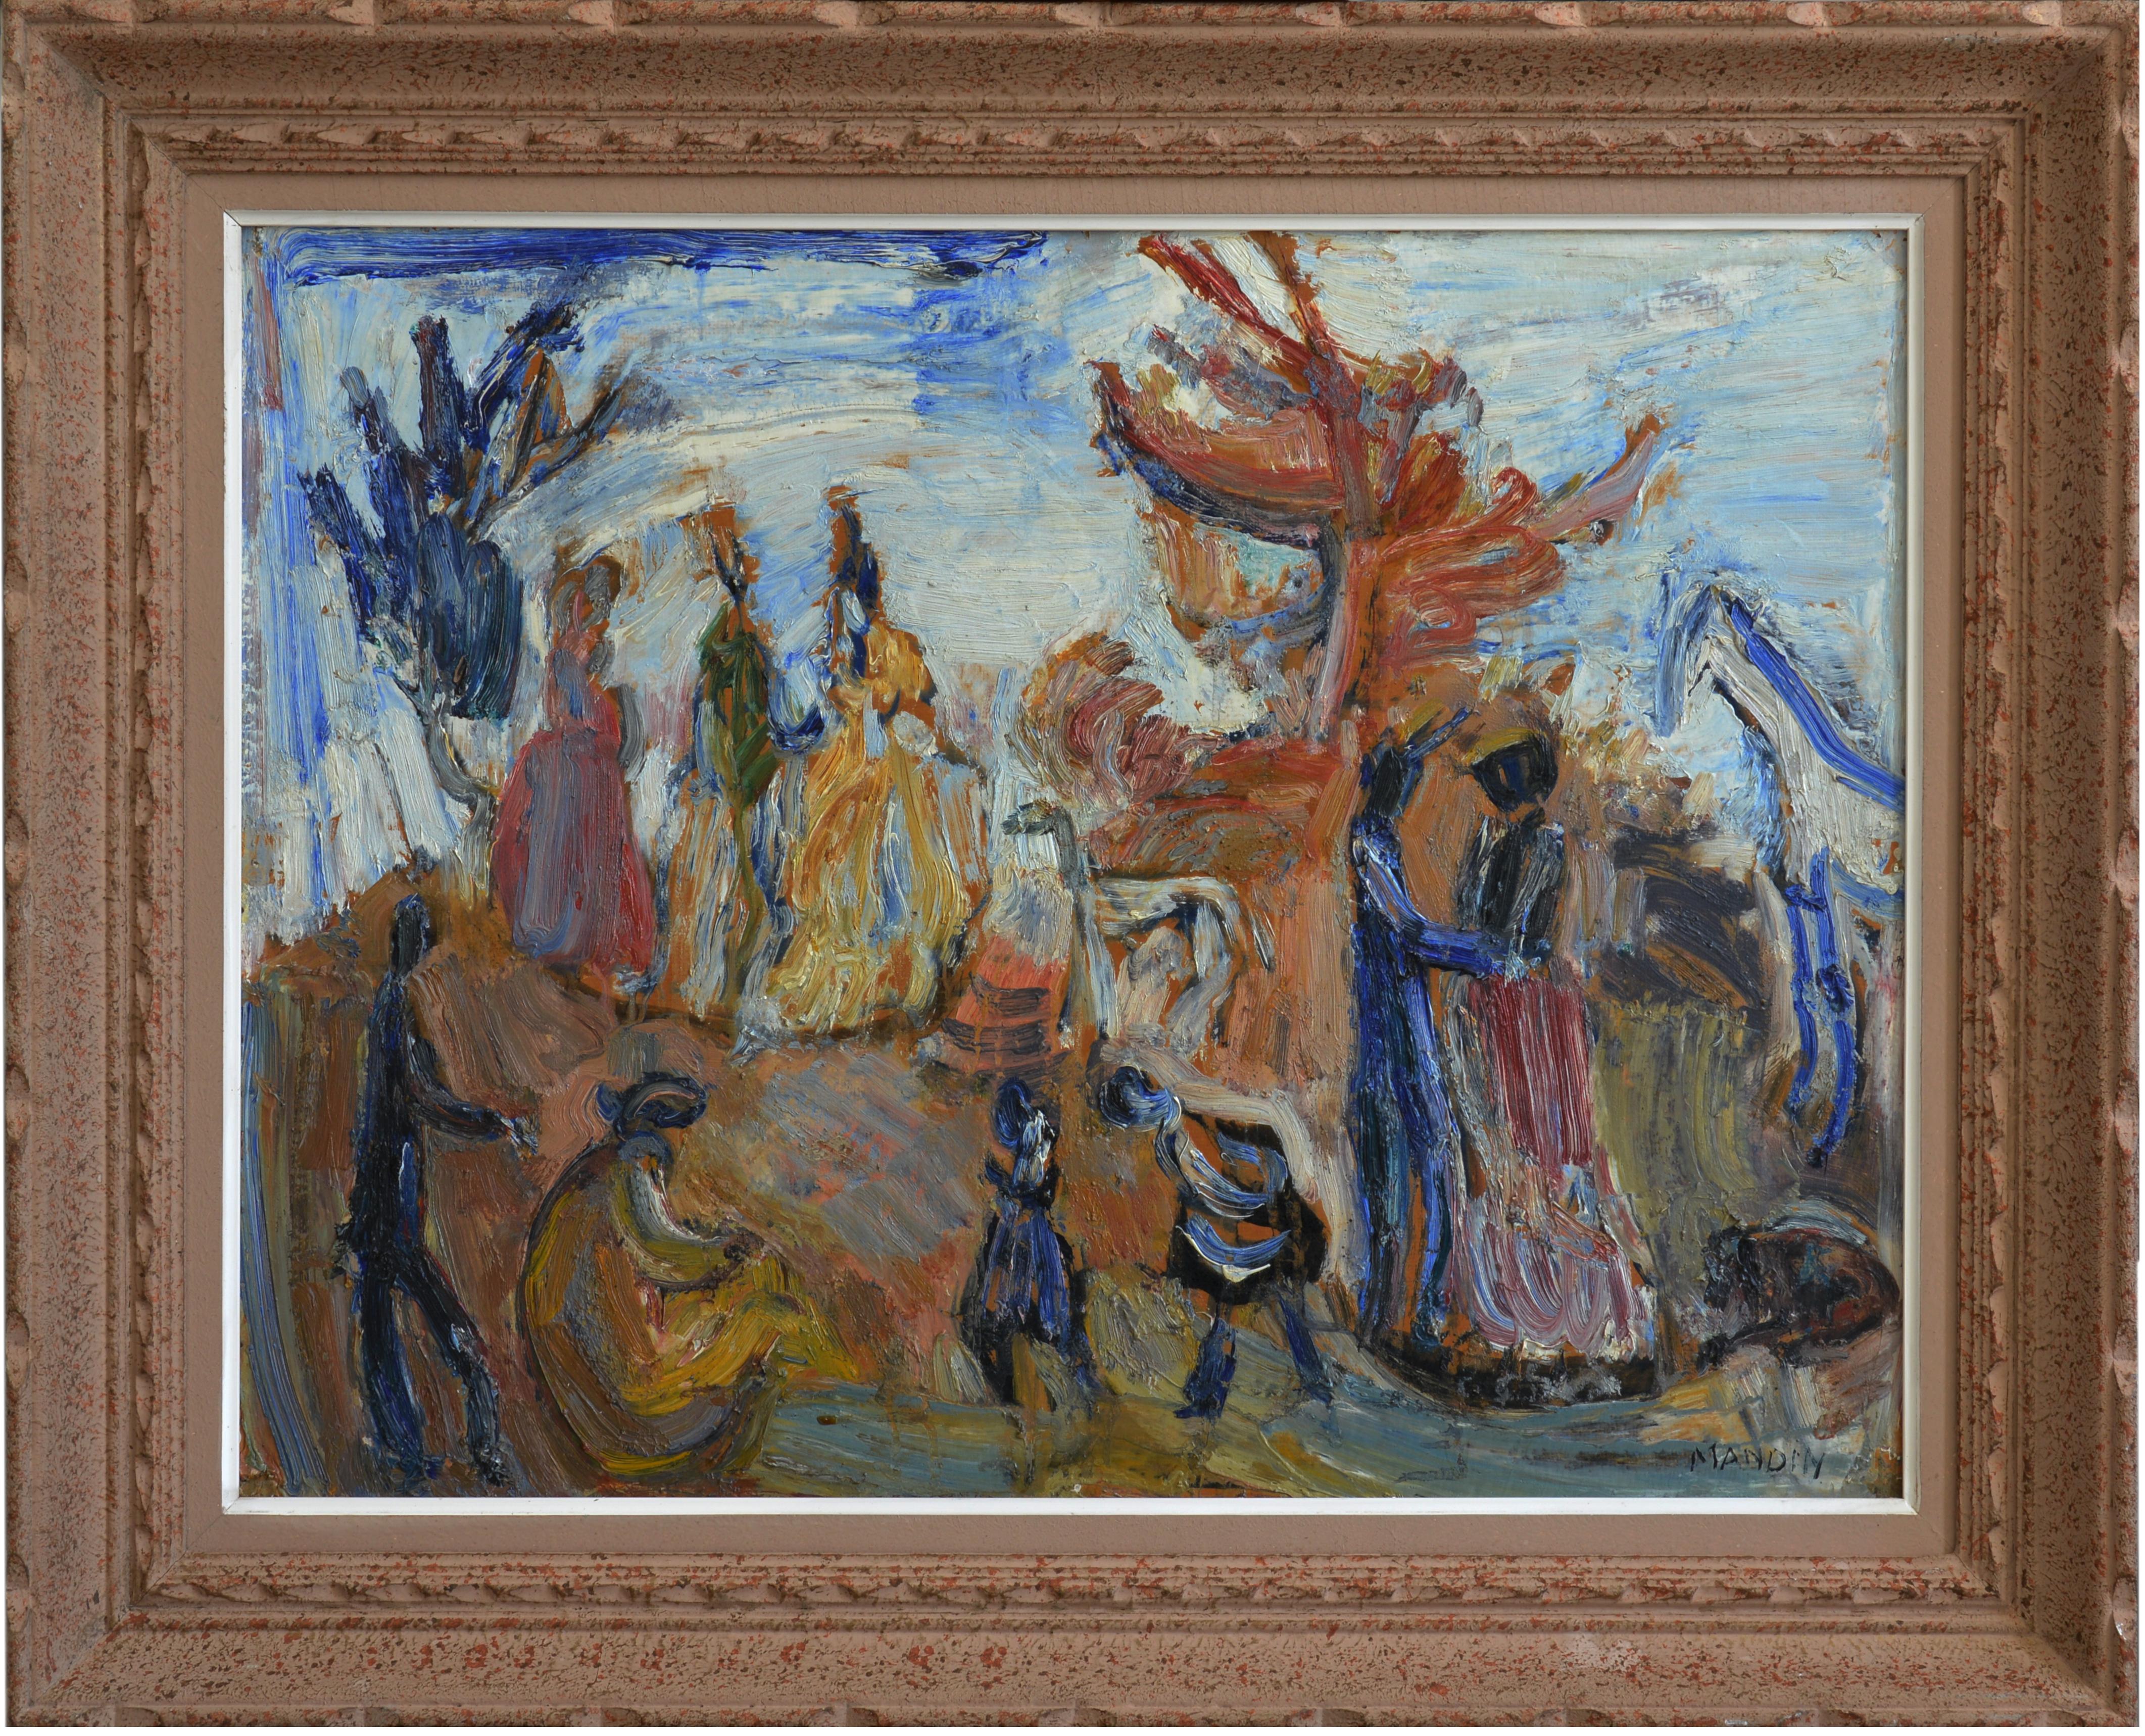 Any fair offer will be examined with the utmost attention, please send a message. Oil on cardboard by Richard Mandin (1909-2002), France, ca.1960. Sunday in the park. Marseille School of Peano. Measurements : with frame: 62.7x77.8 cm - 24.7x30.6